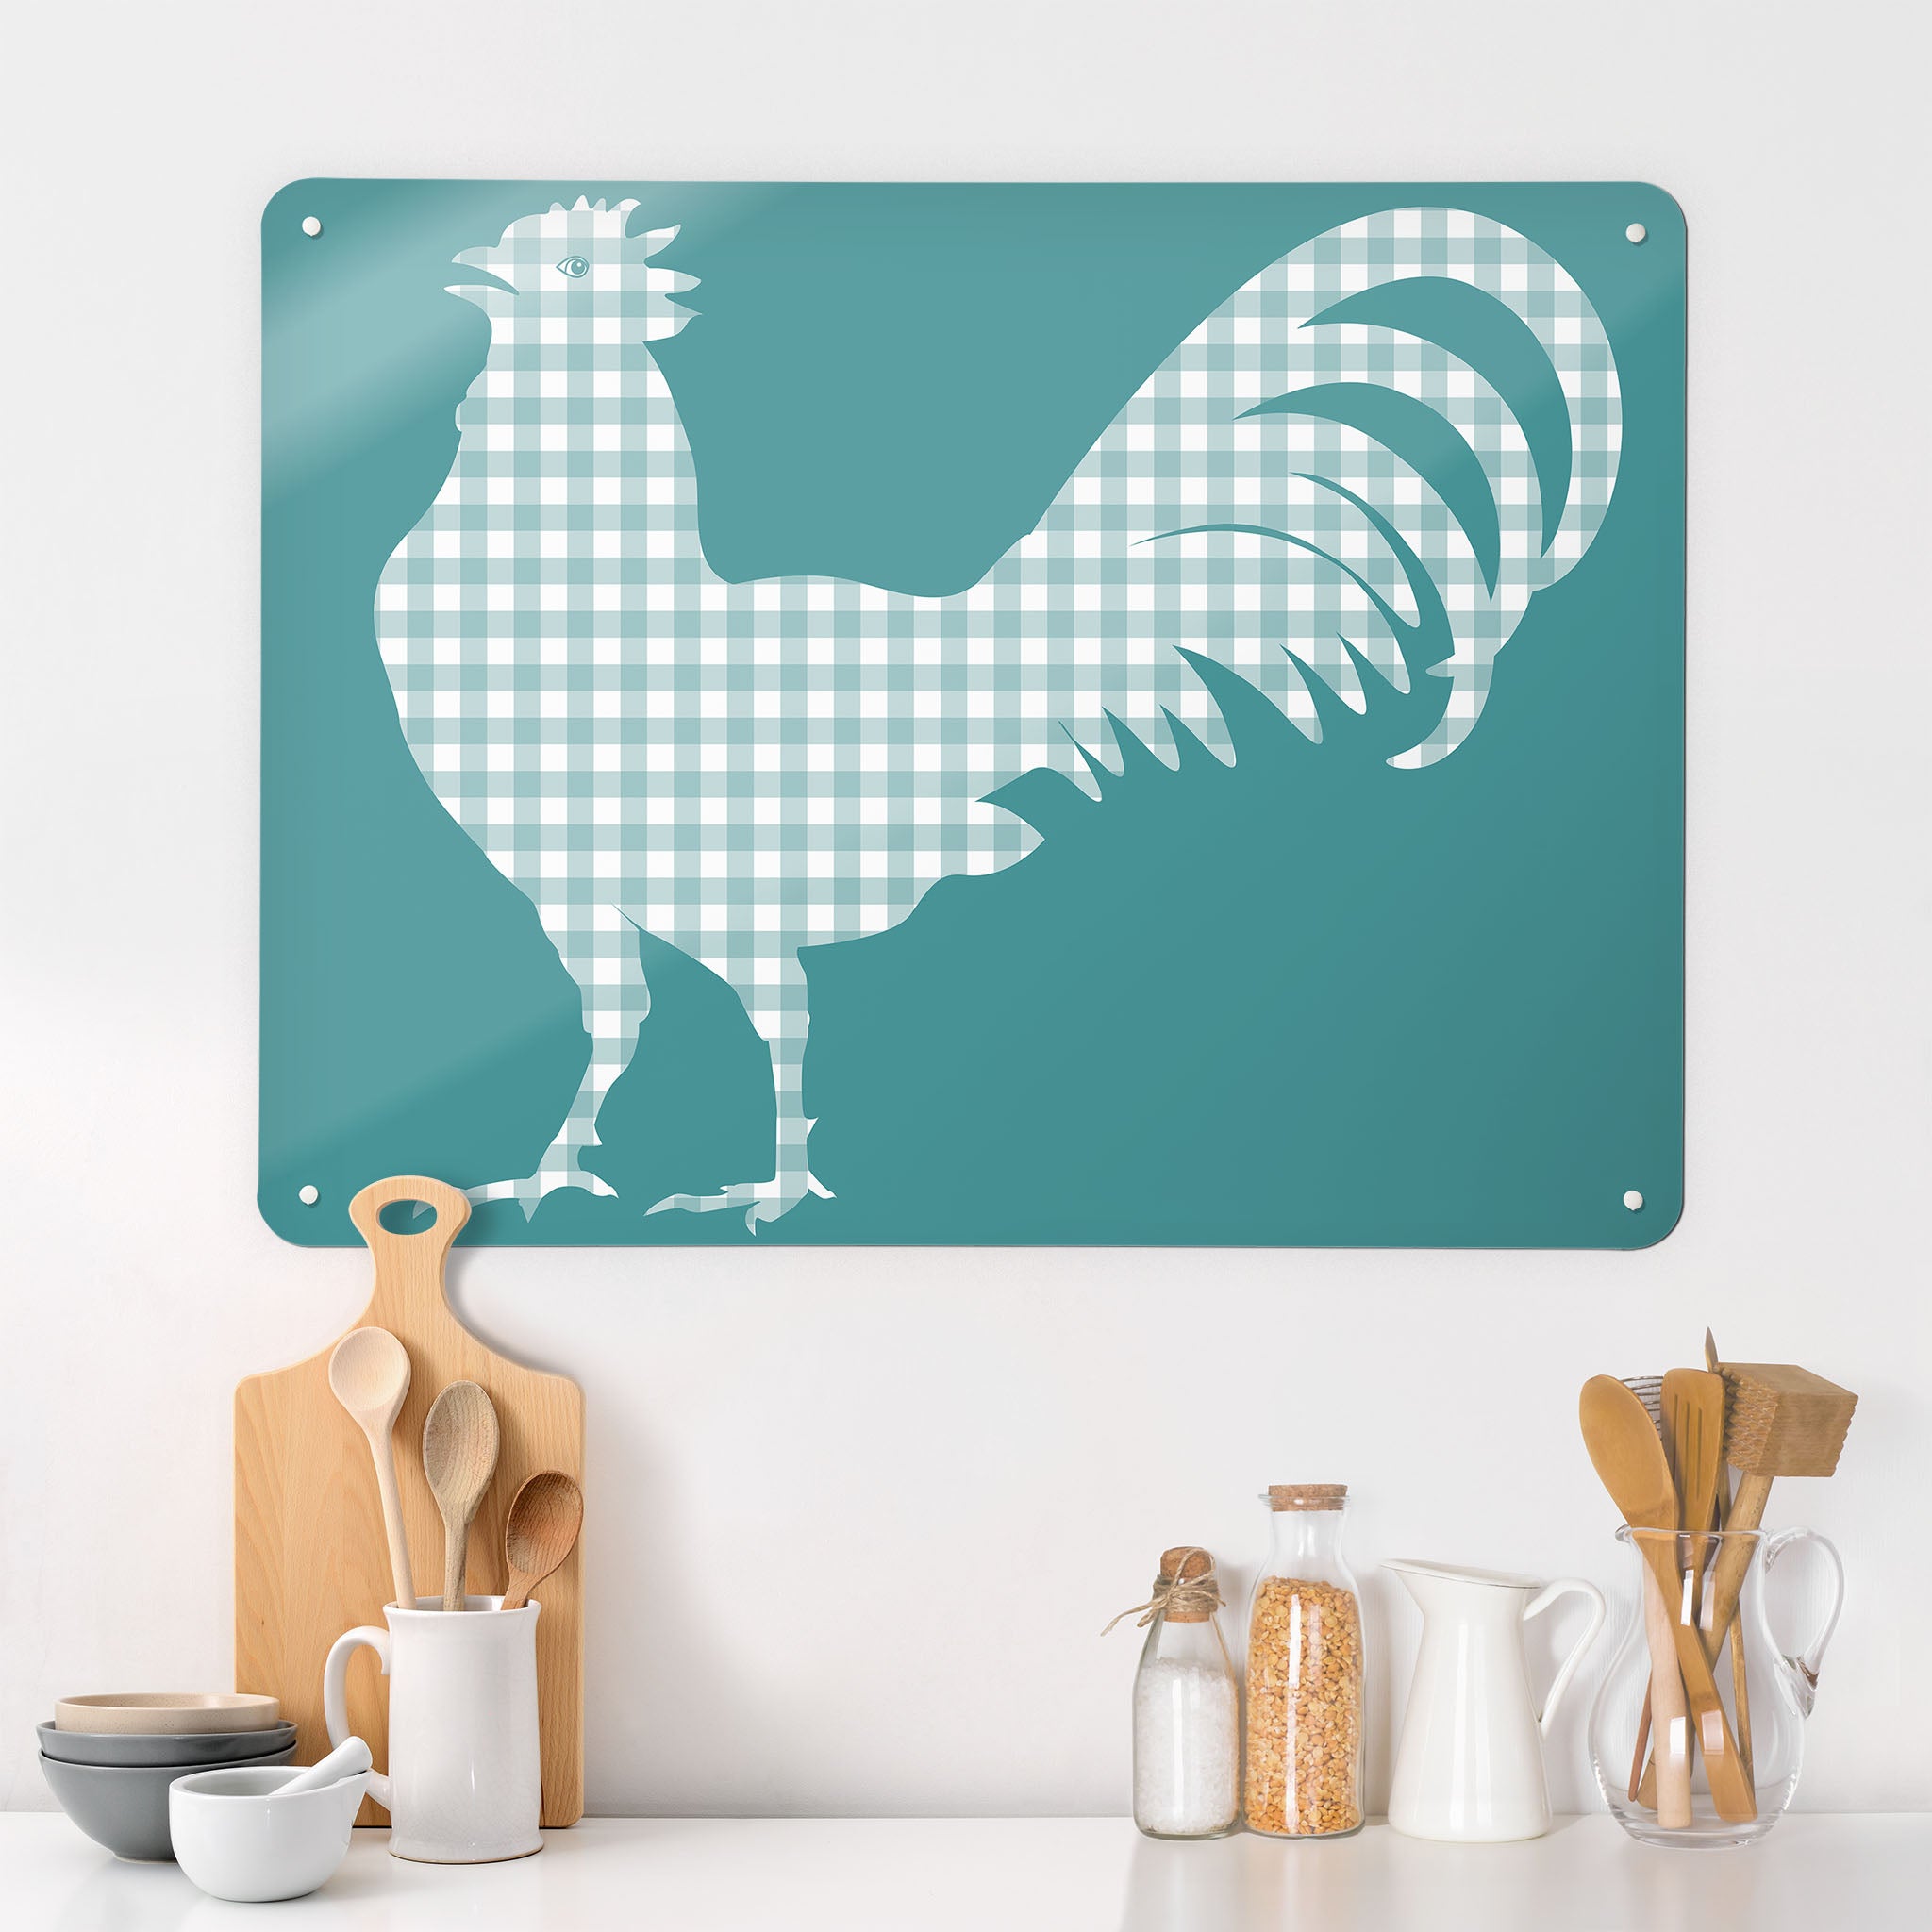 A kitchen interior with a magnetic metal wall art panel with a blue gingham cockerel design